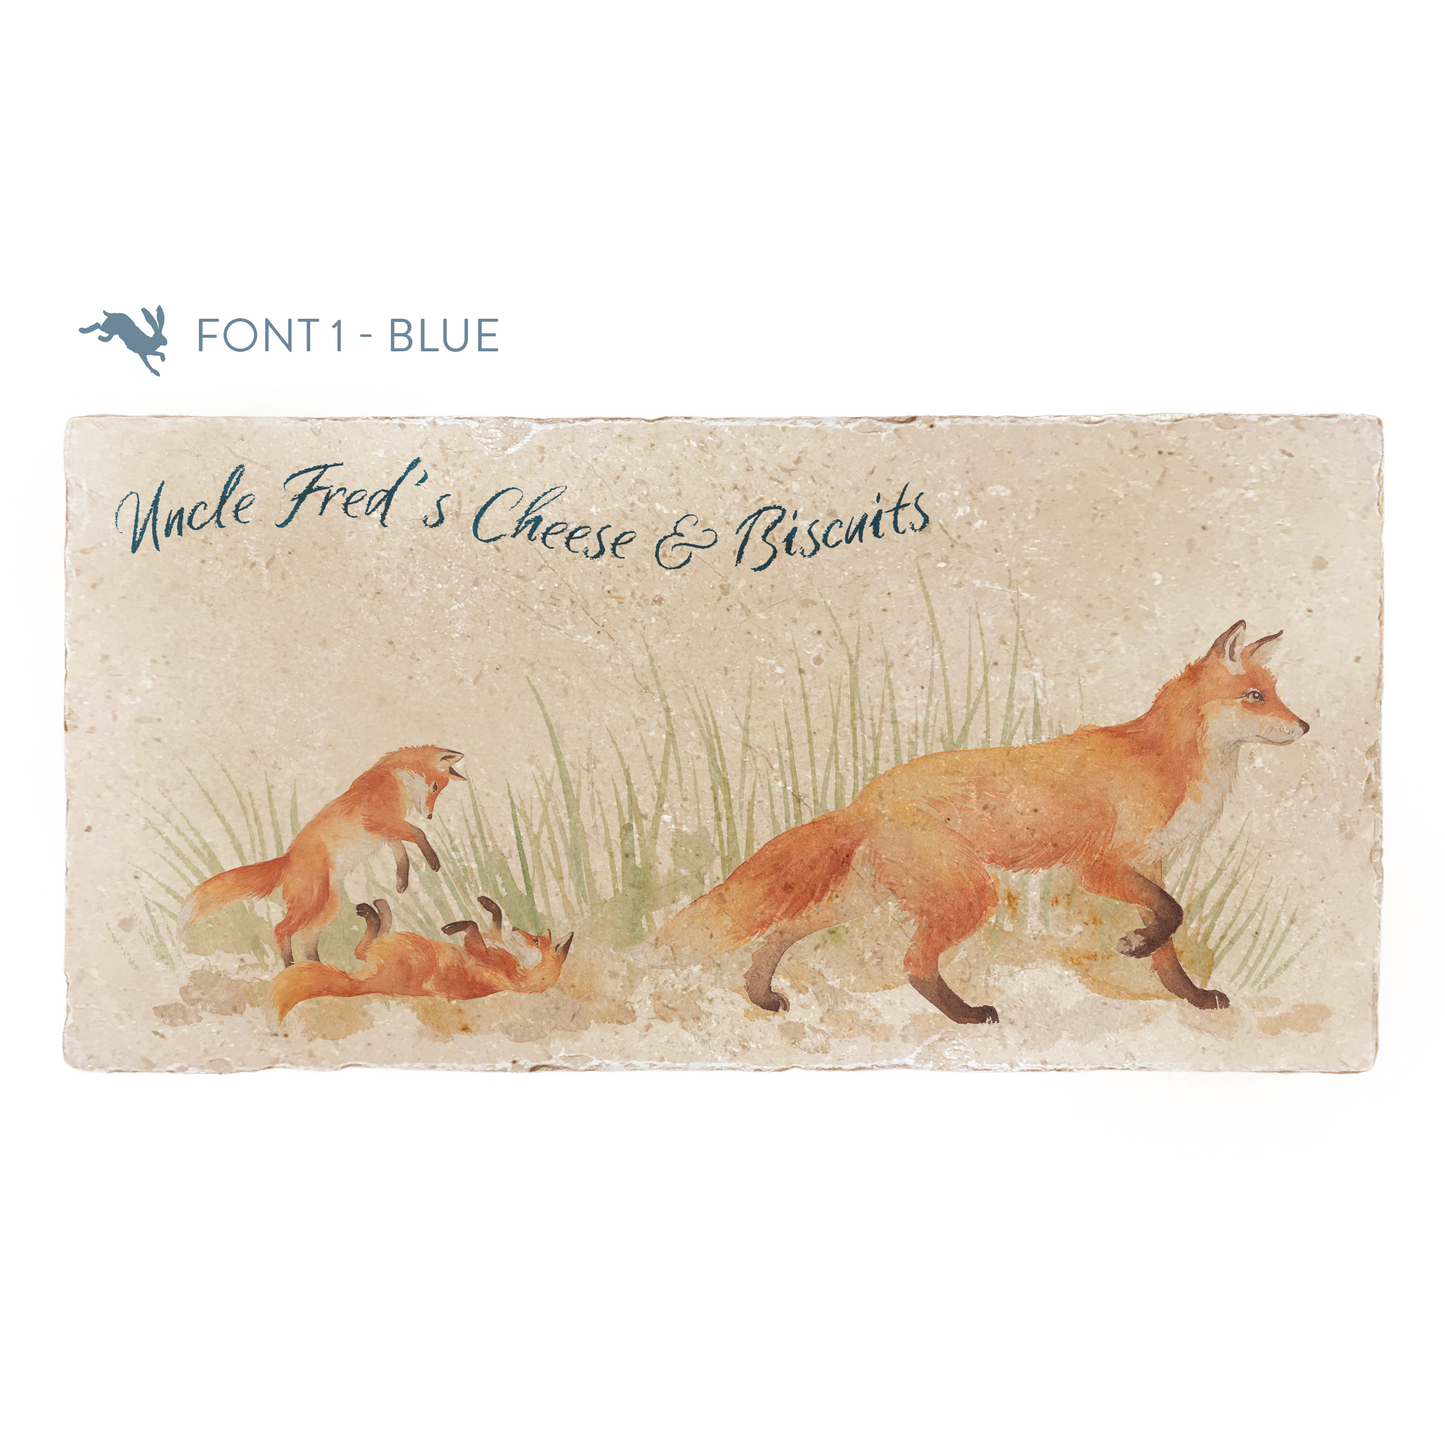 A personalised rectangular marble sharing platter featuring a fox design. The example personalised dark blue text reads Uncle Fred's Cheese & Biscuits in a brush script font.